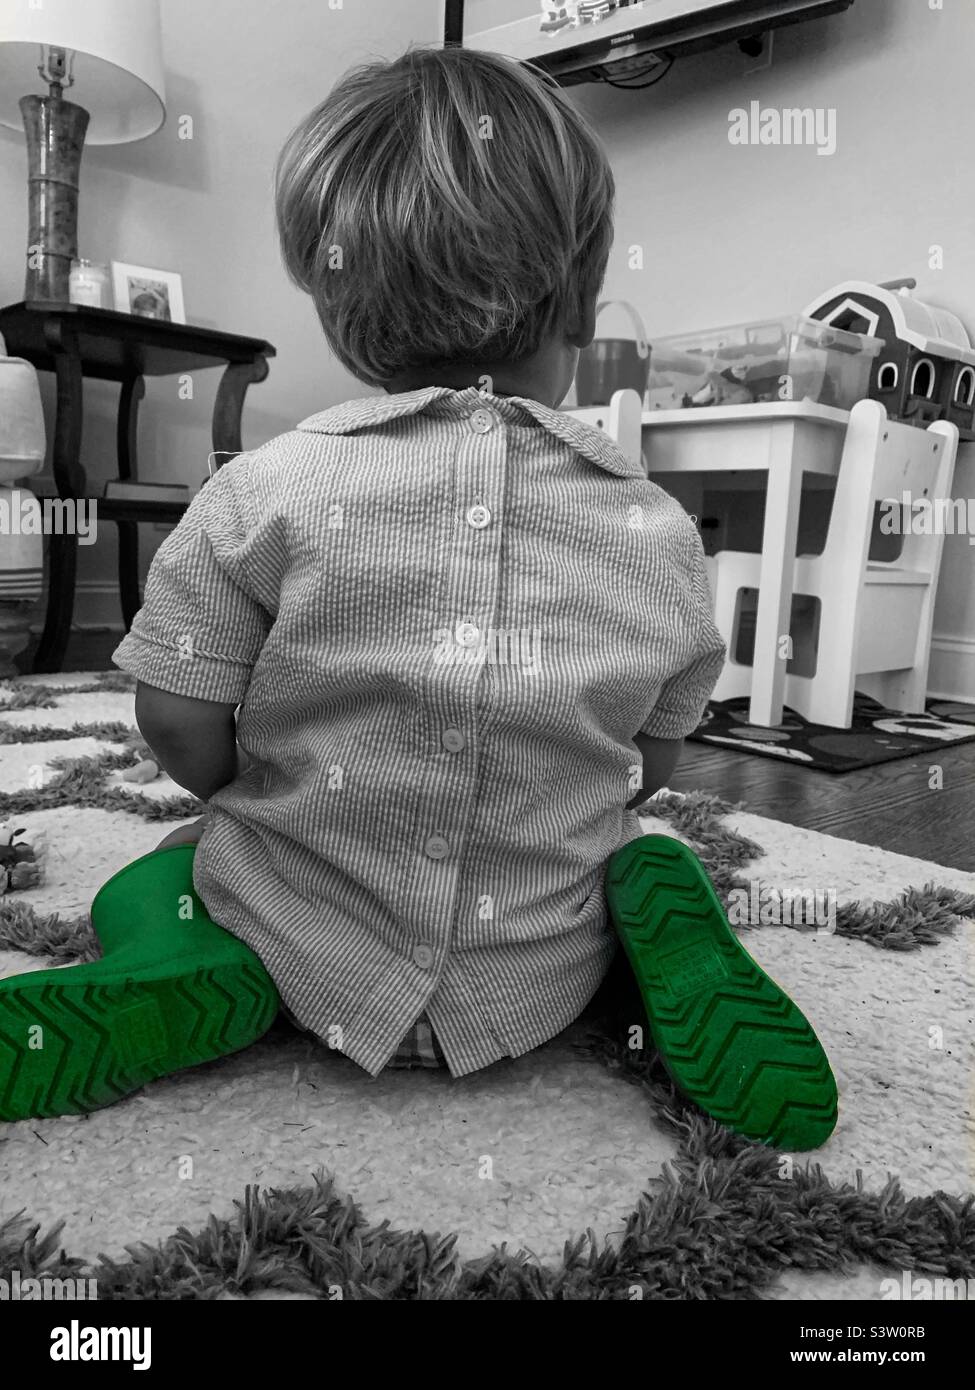 Little boy sitting in his dress shirt and favorite rain boots Stock Photo